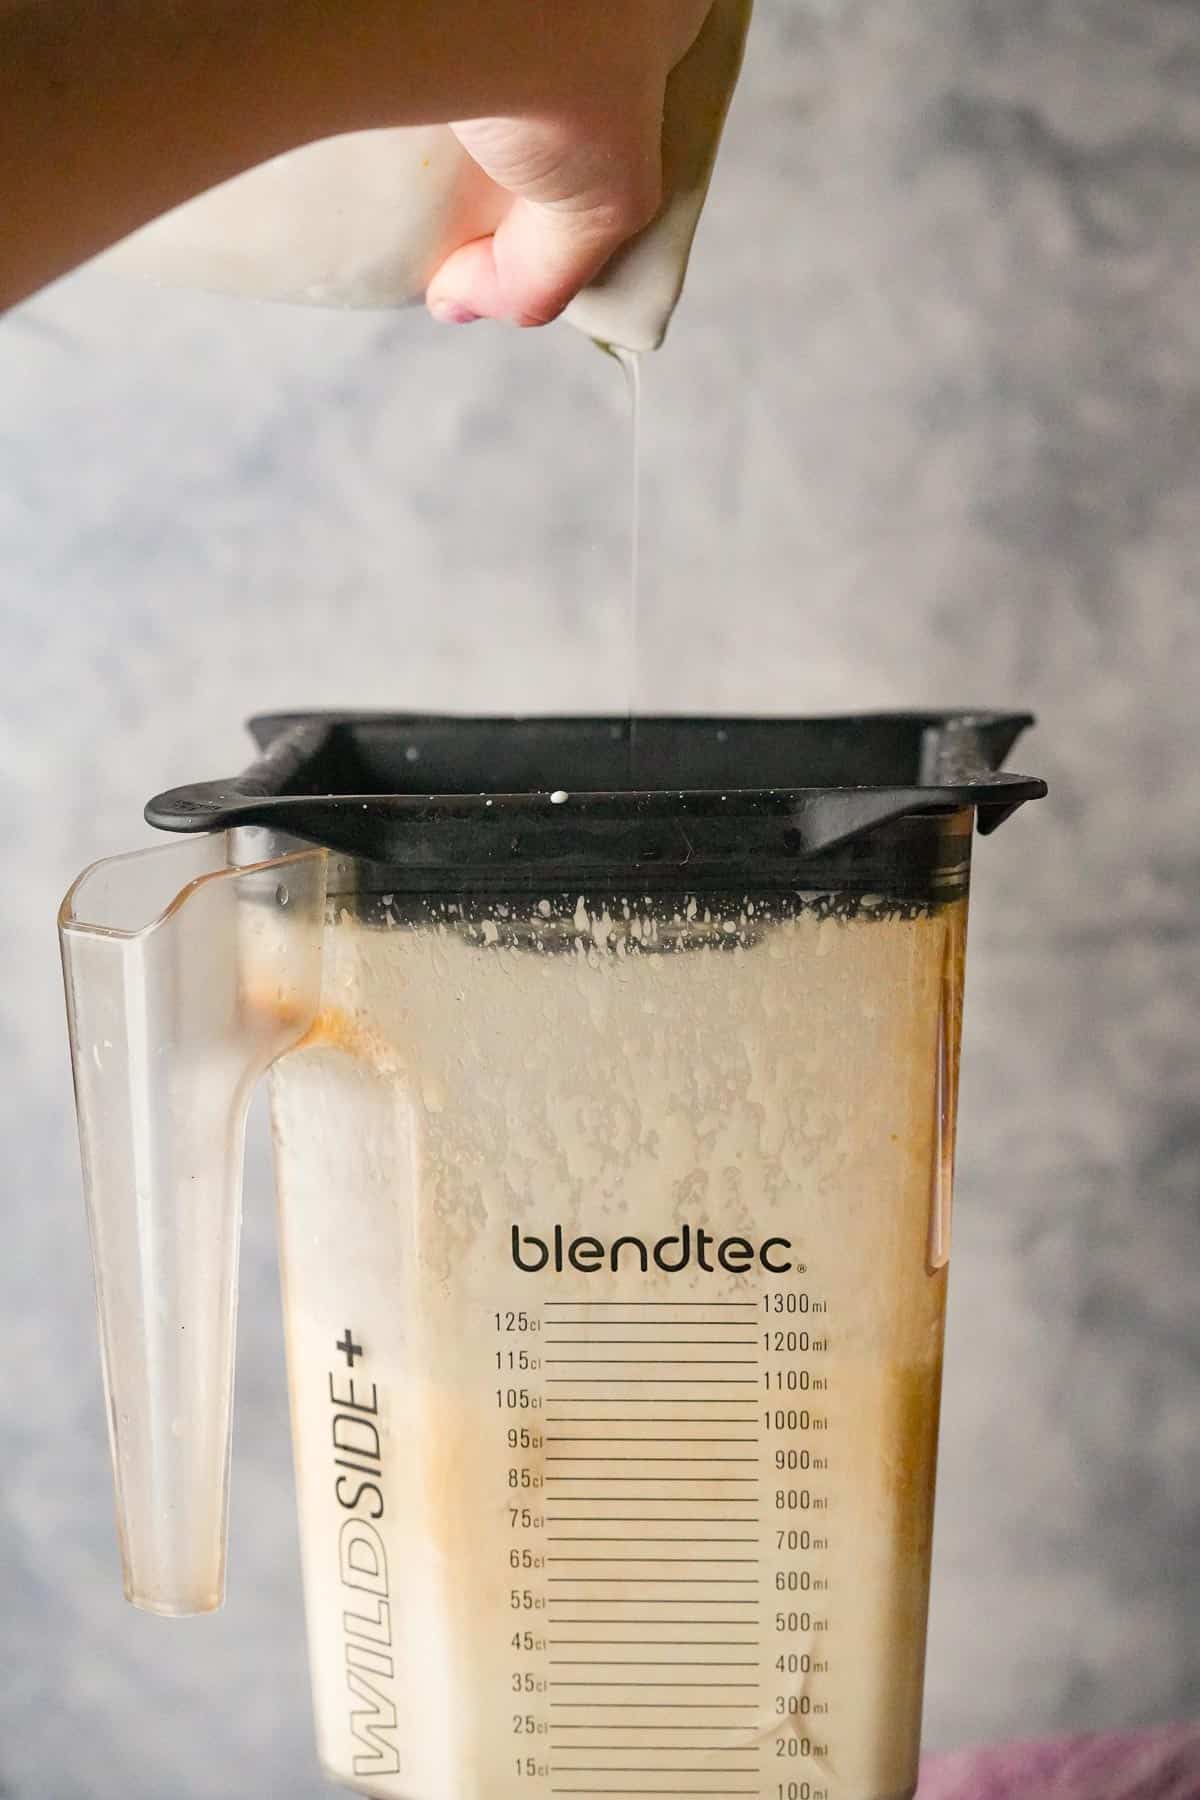 A person drizzling oil into a blender which is running.